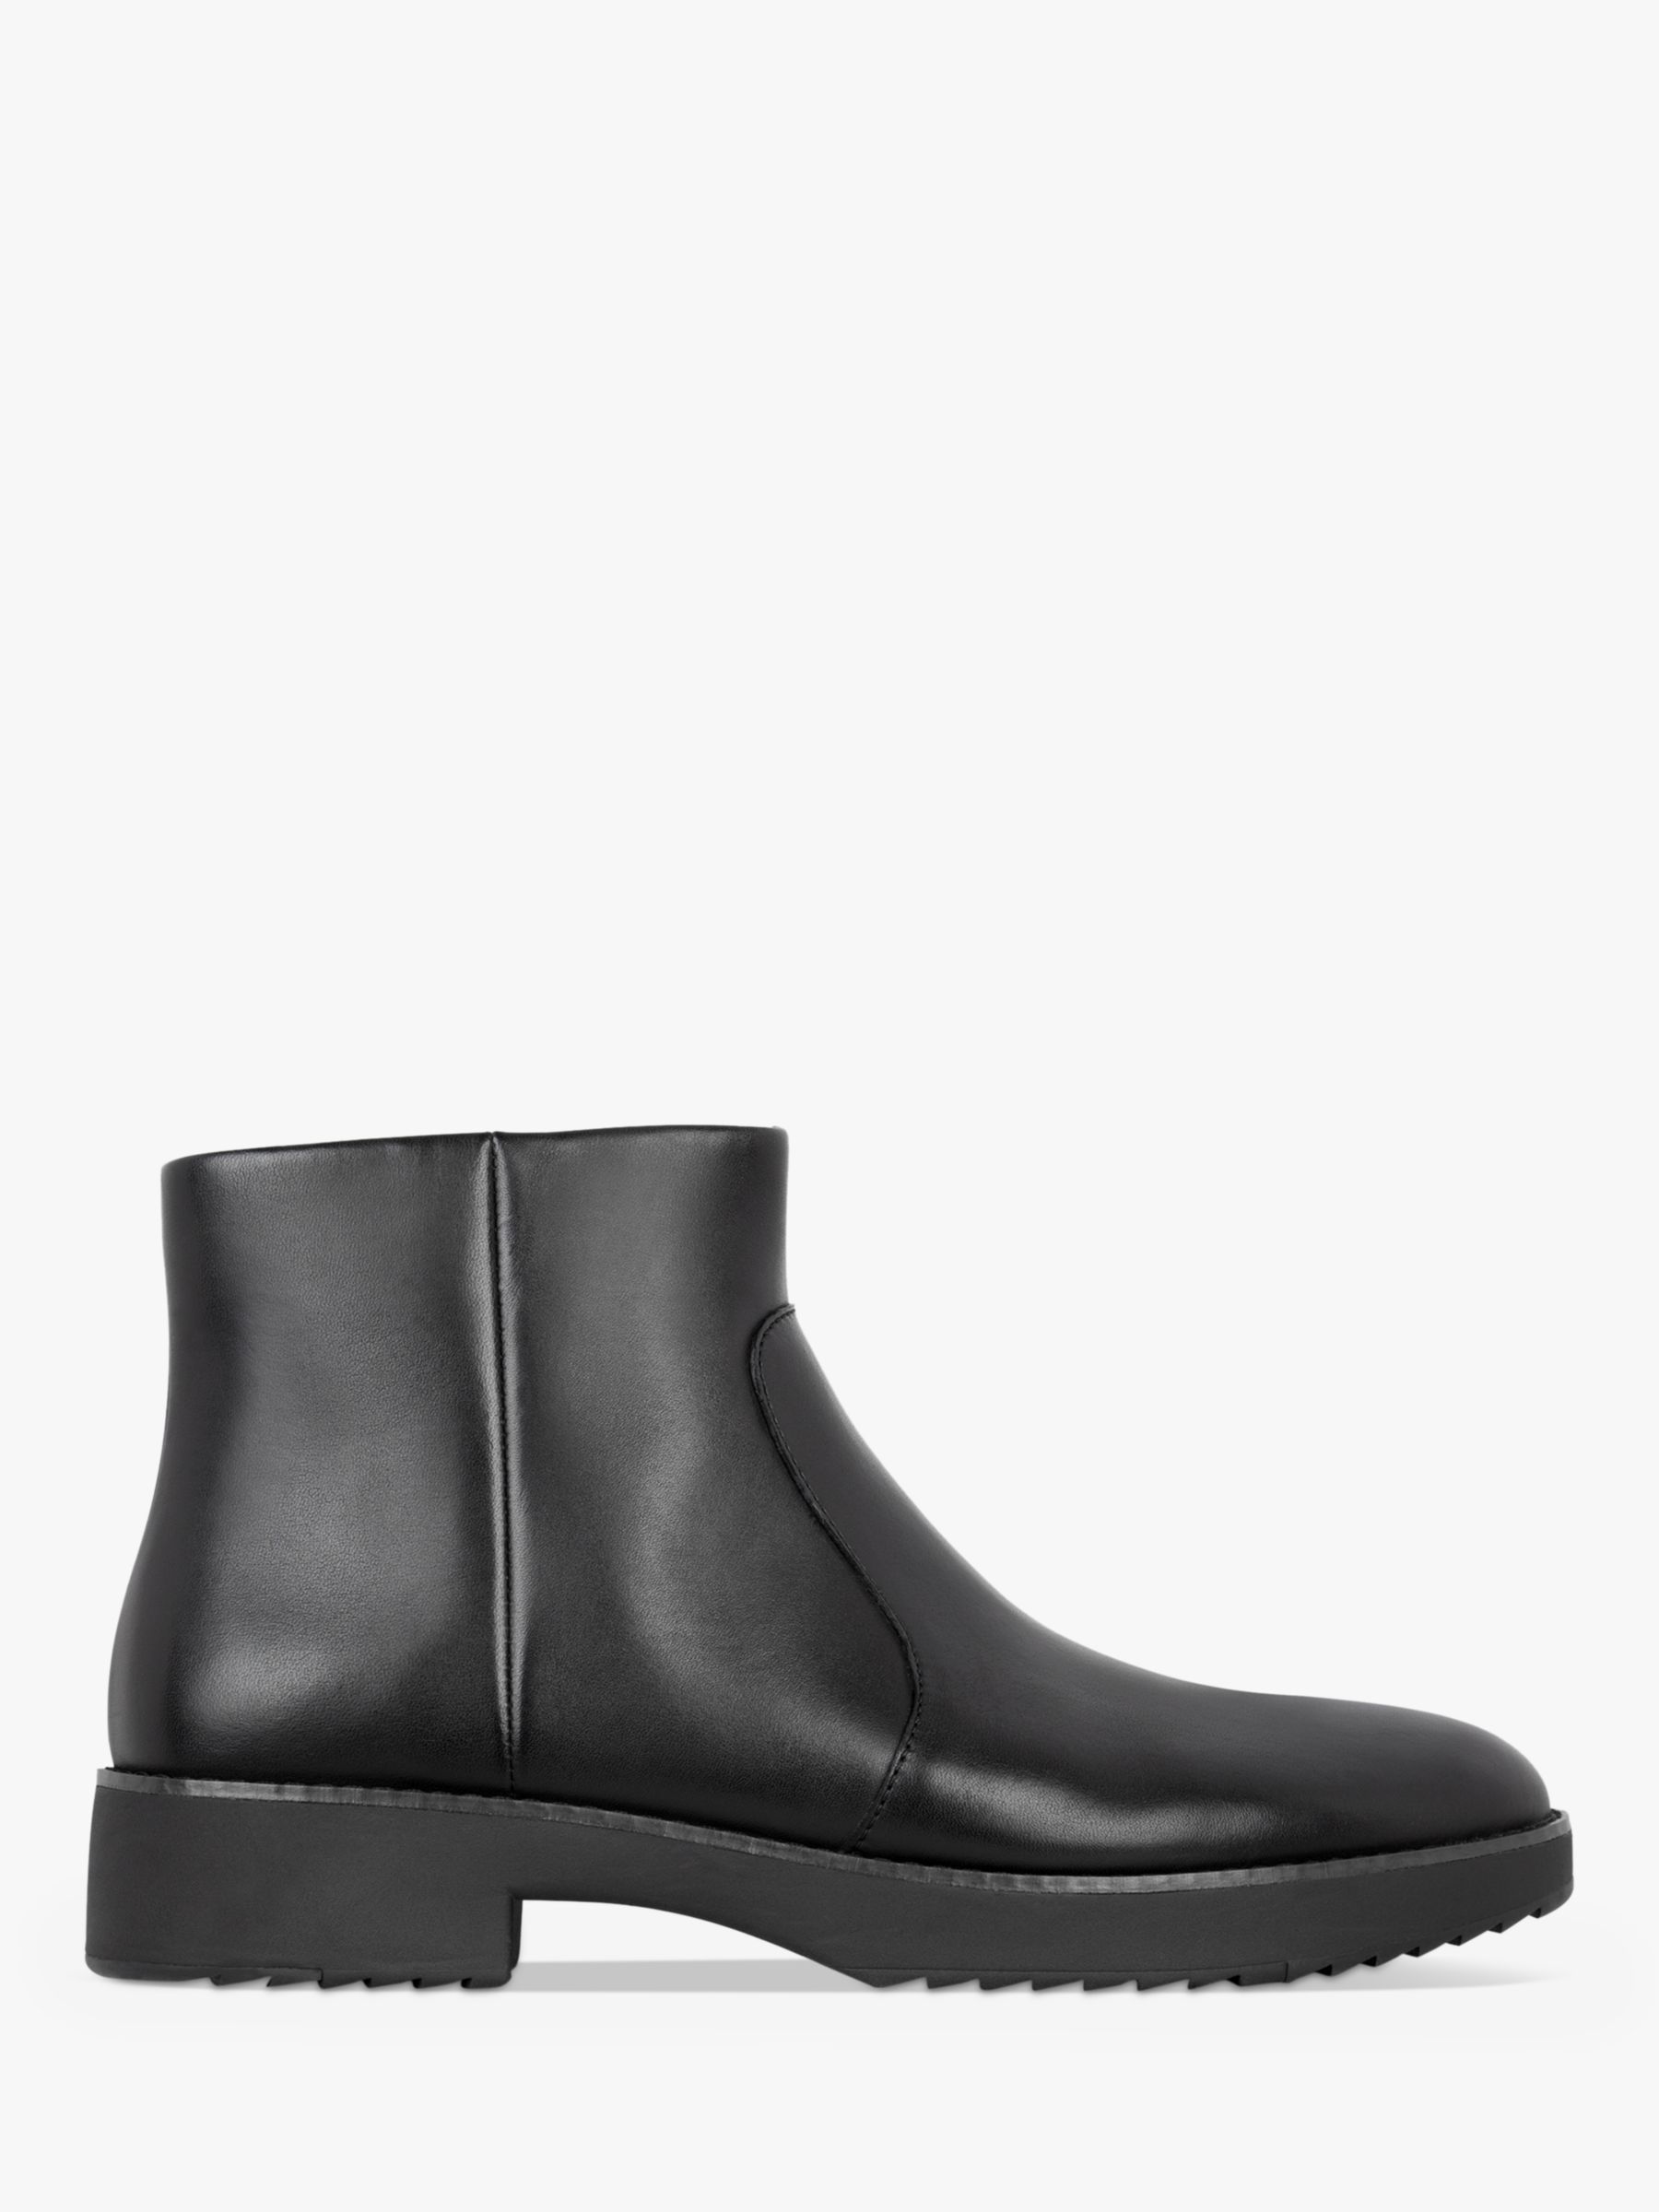 FitFlop Maria Leather Ankle Boots, Black at John Lewis & Partners